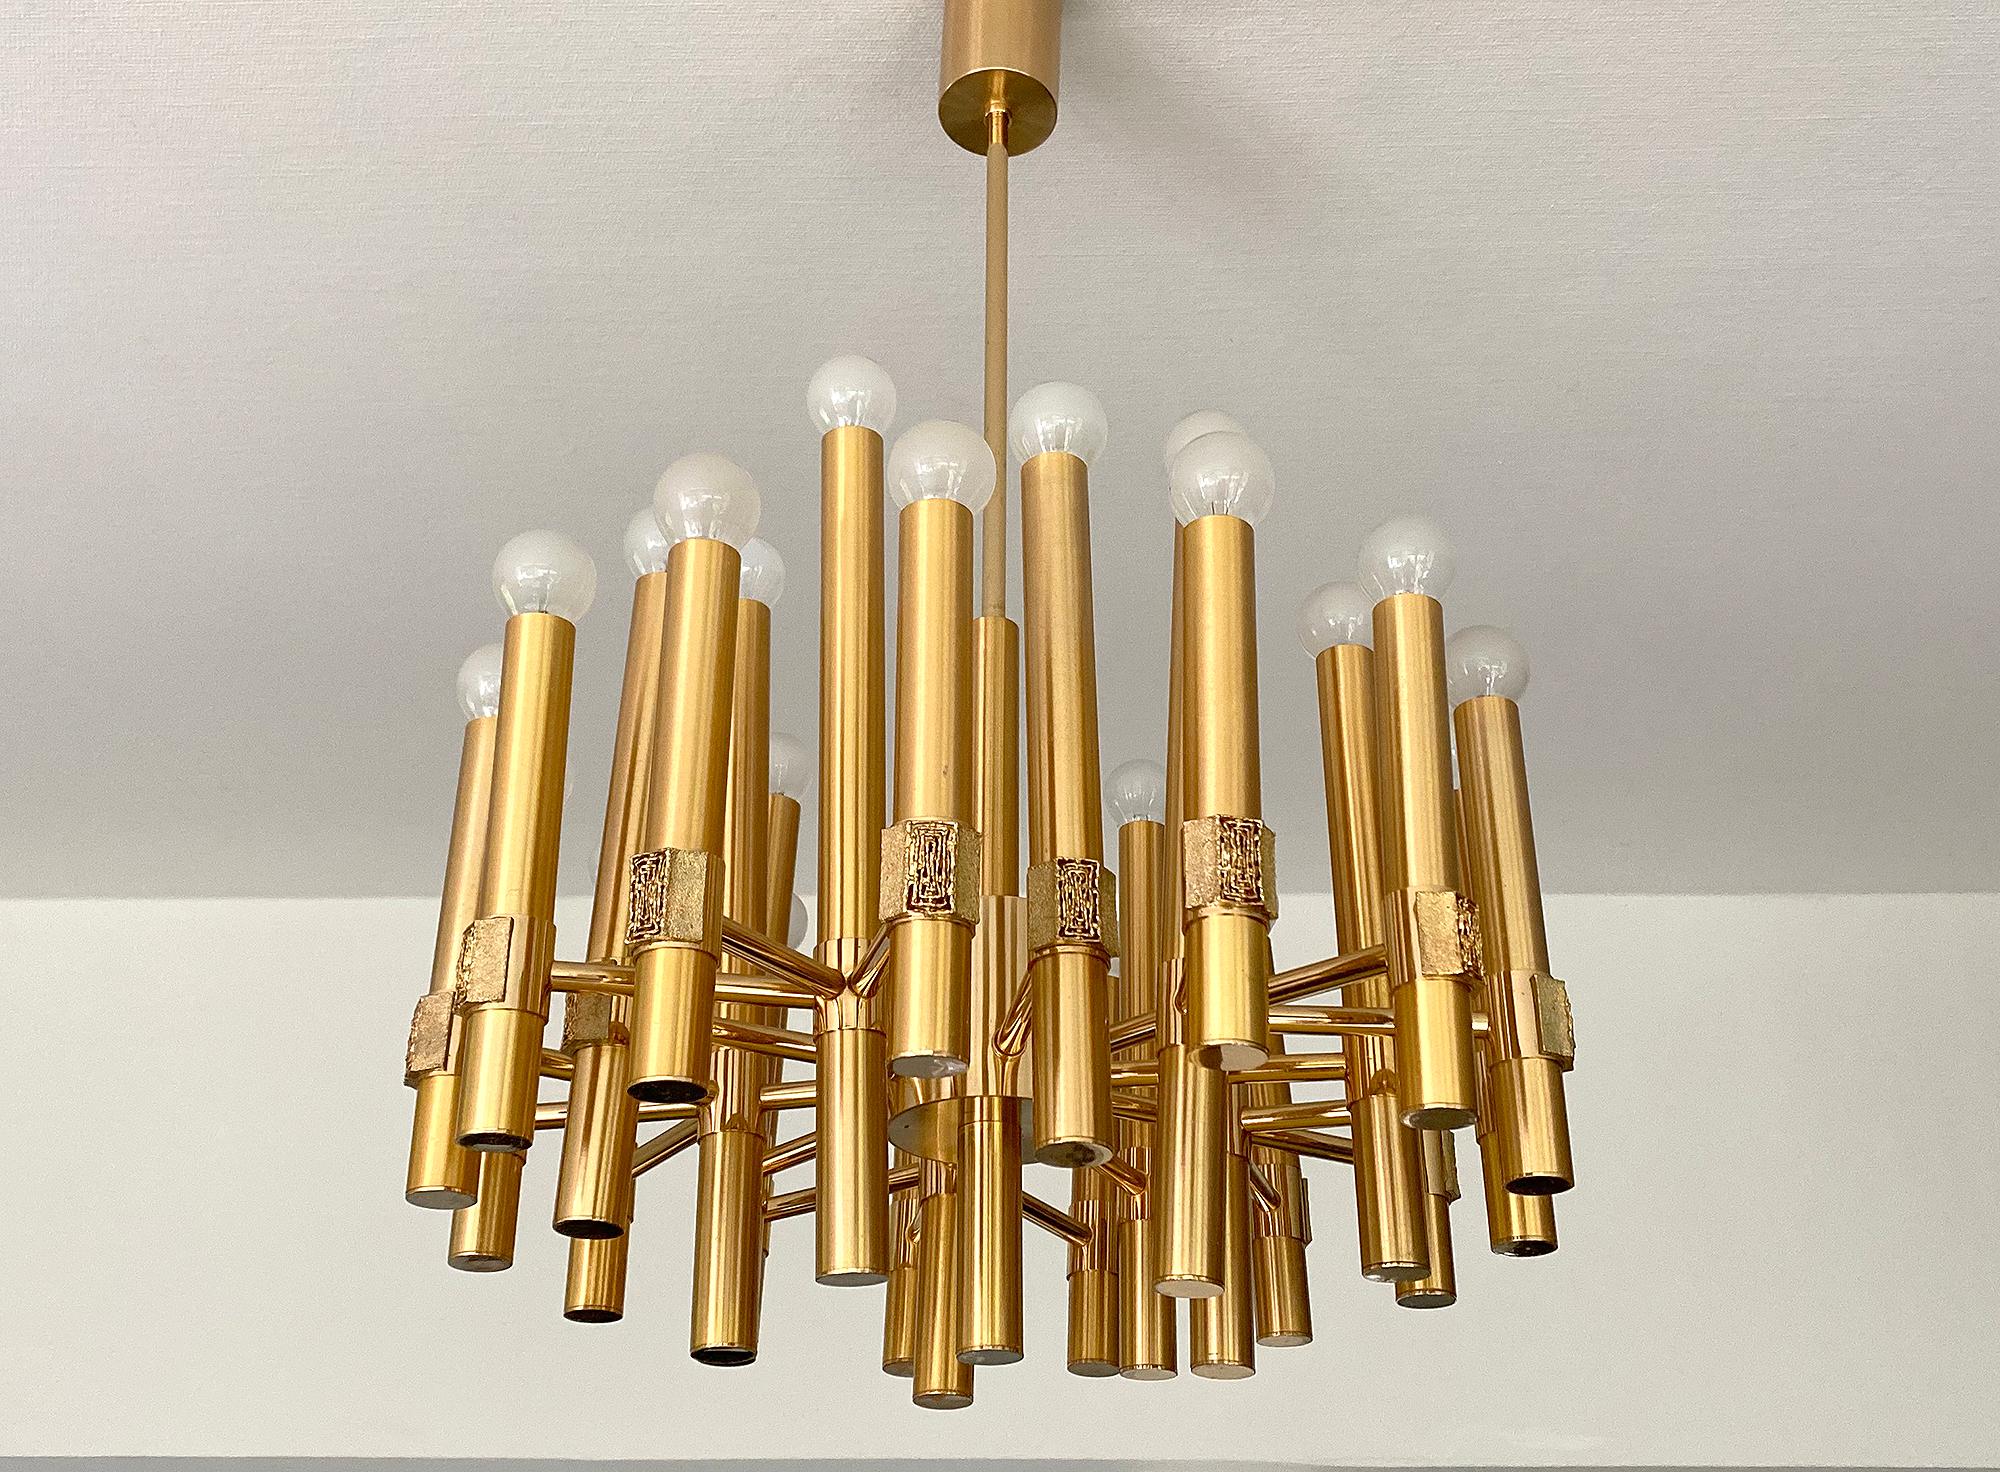 Impressive chandelier by Gatetano Sciolari , brass structure with ramificated 20 spokes, brutalist ornamentation on each of the 
end pieces, the spokes in the second row are slightly leaned outward 
Dimensions:
31.5 in. / 80 cmH (total